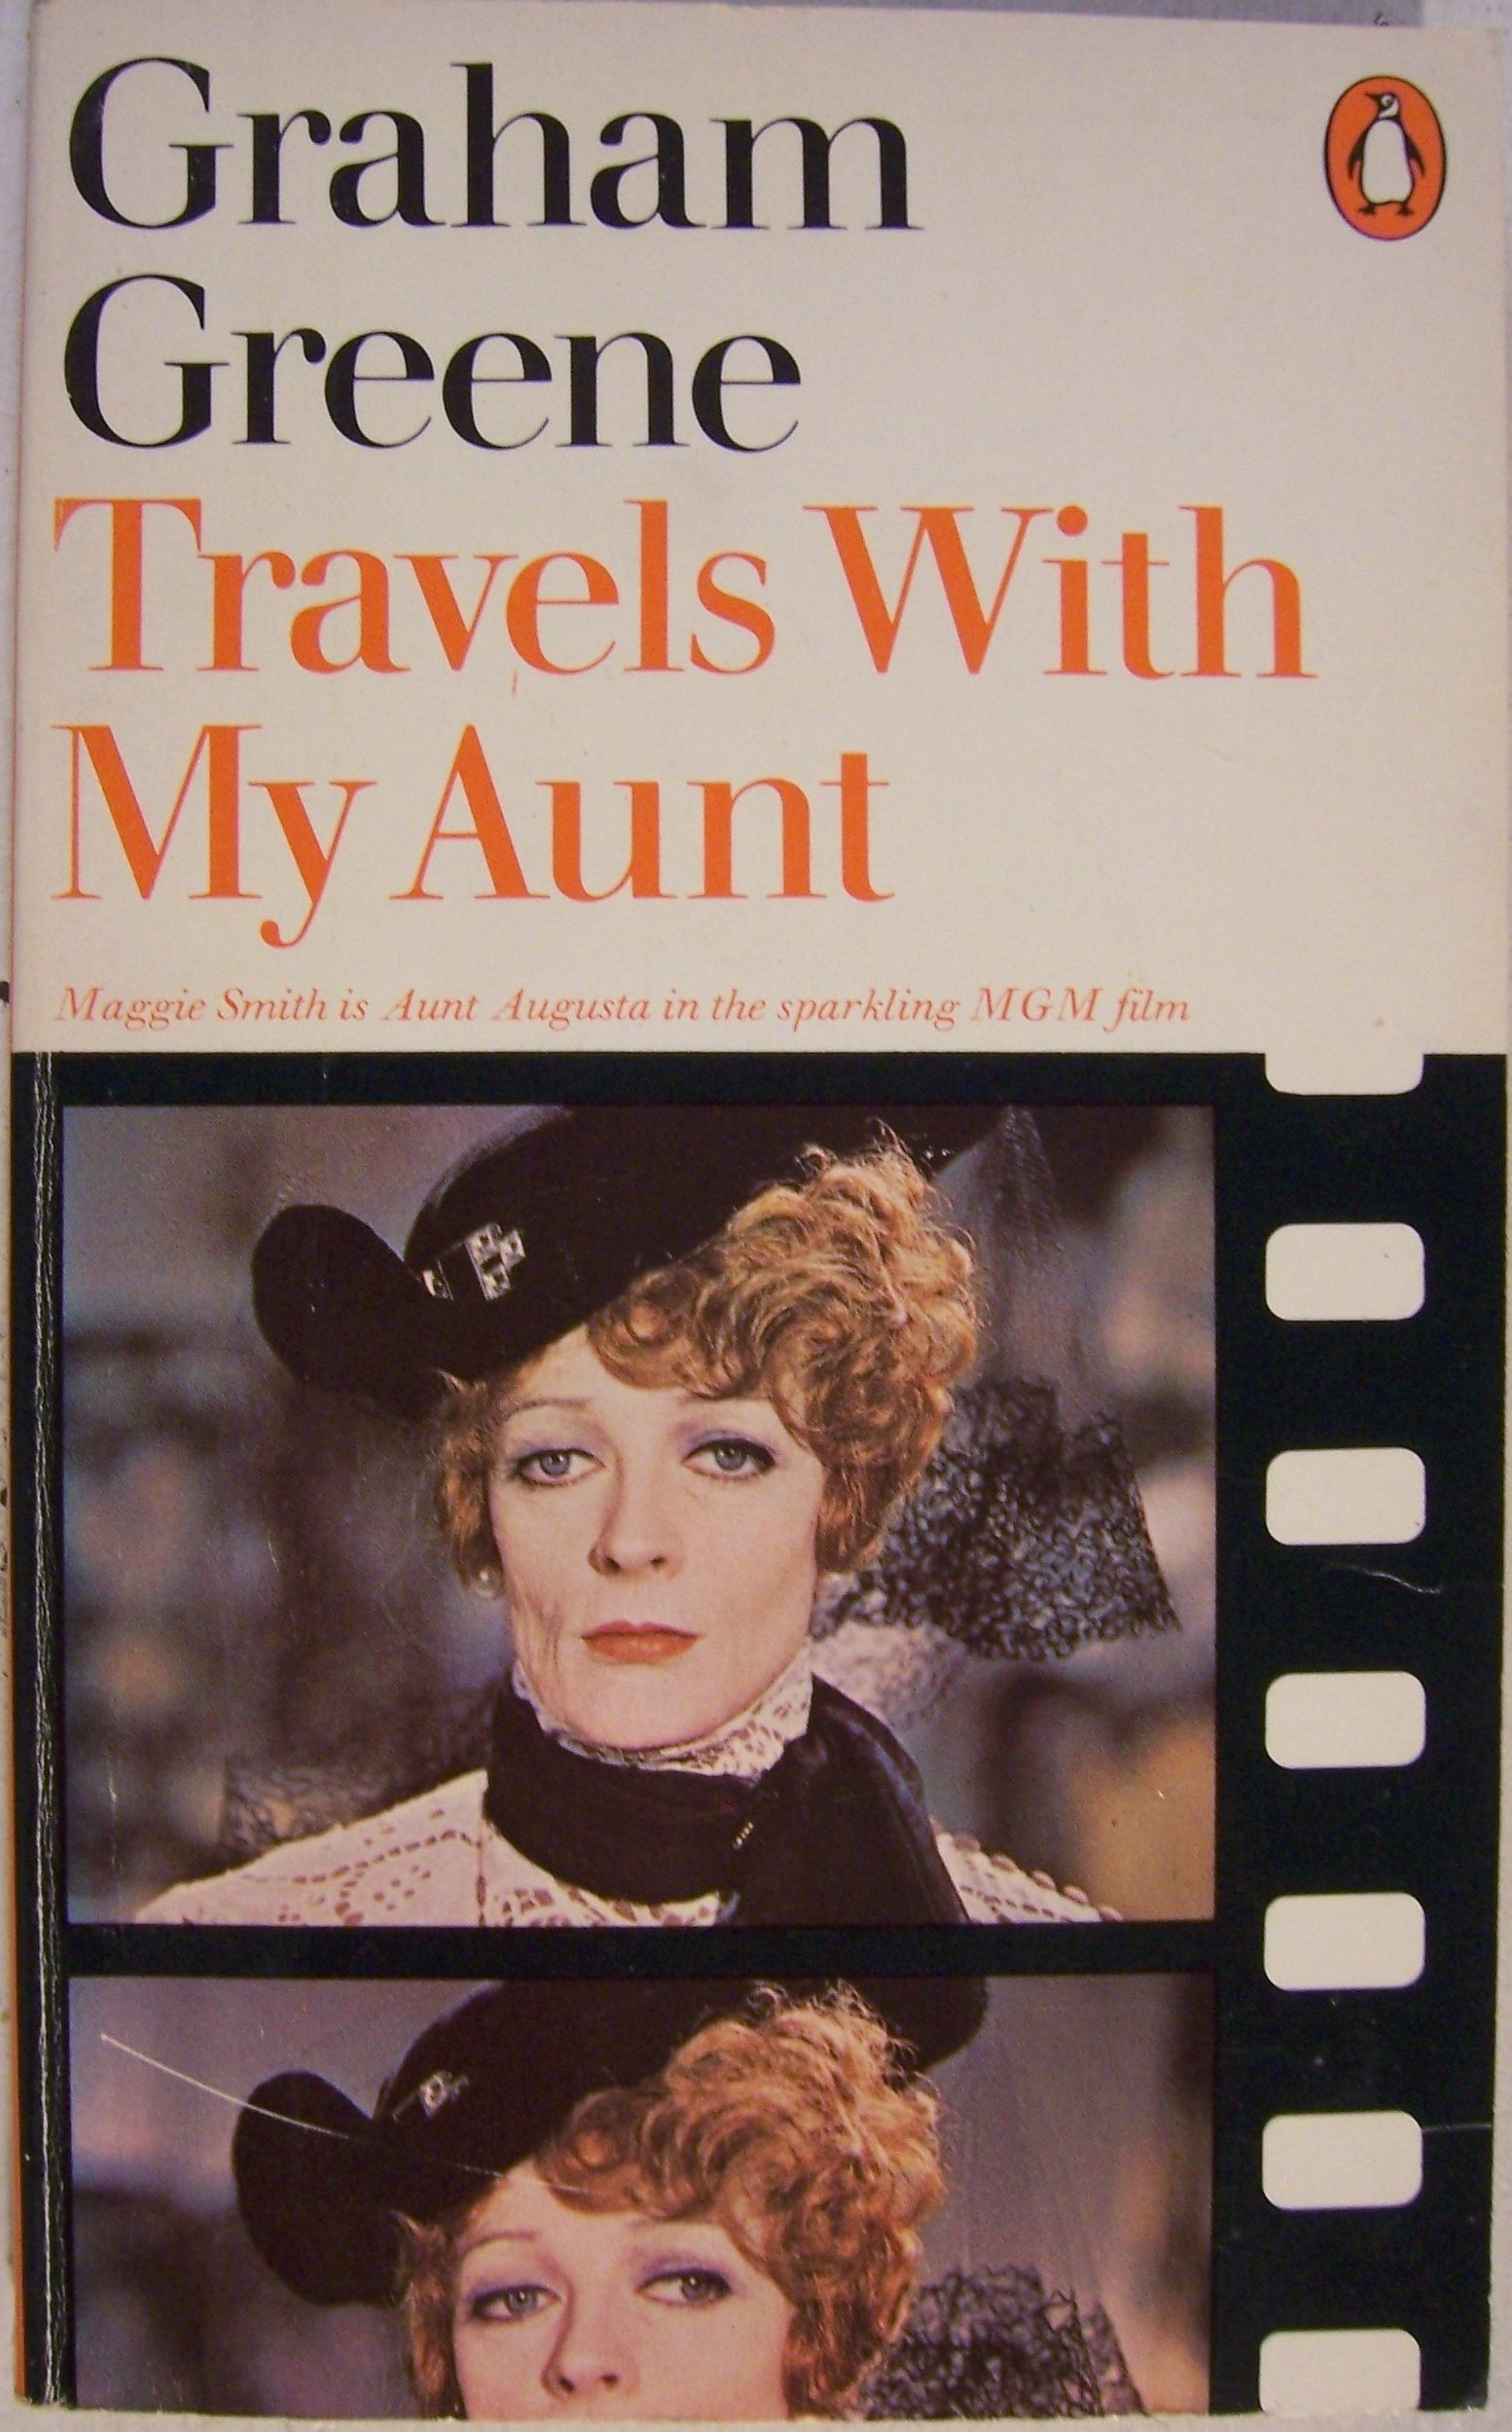 Book Club reads "Travels with my Aunt"